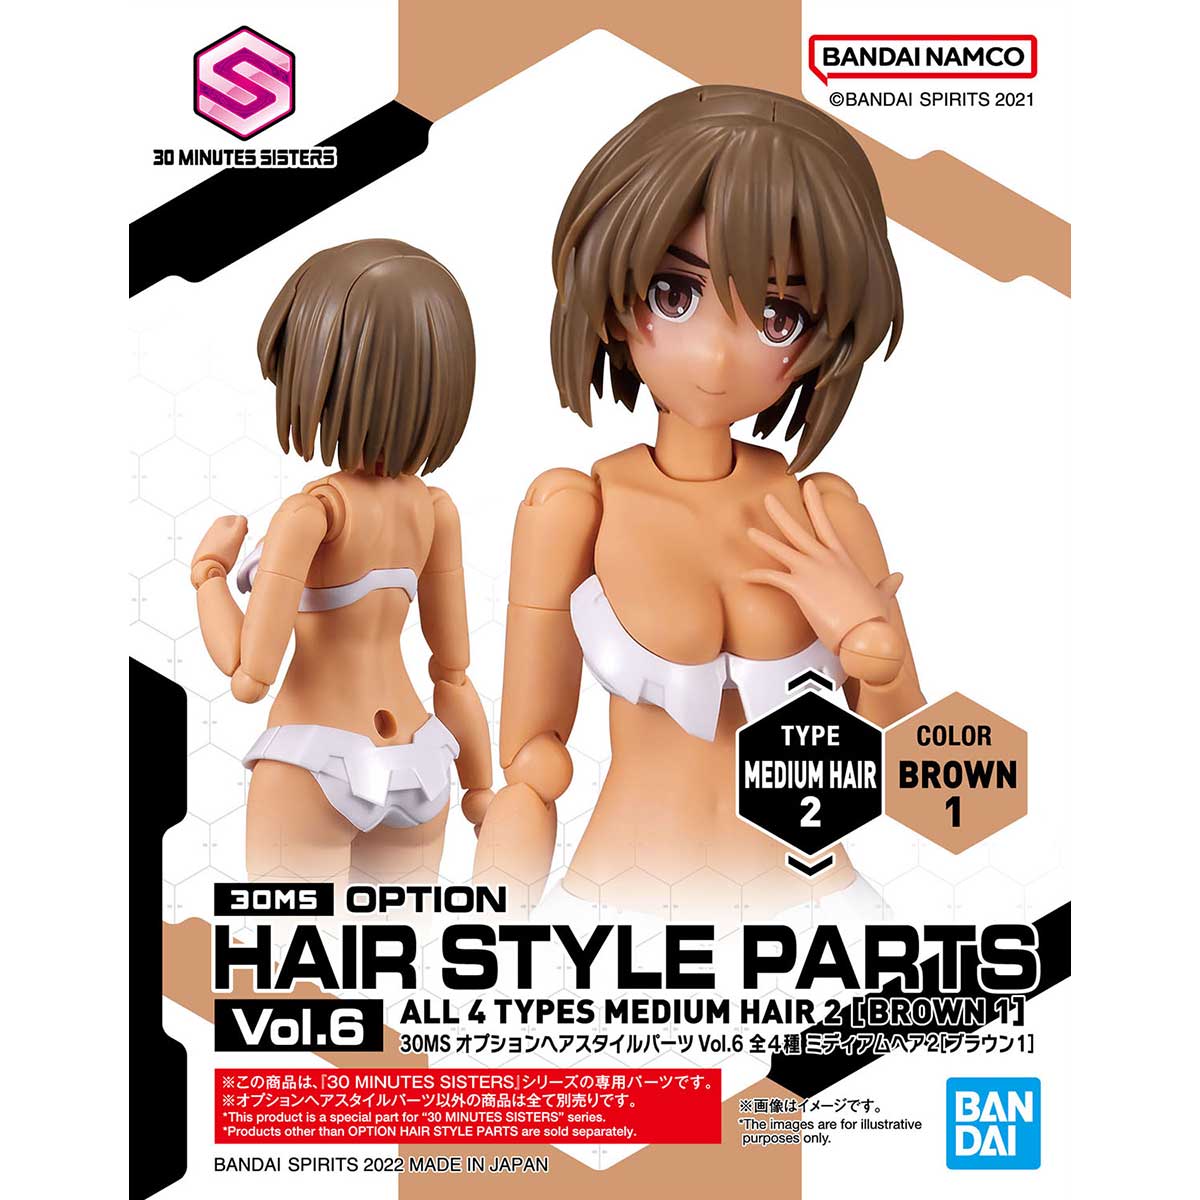 Option Hair Style Parts Vol.6 30MS 1/144